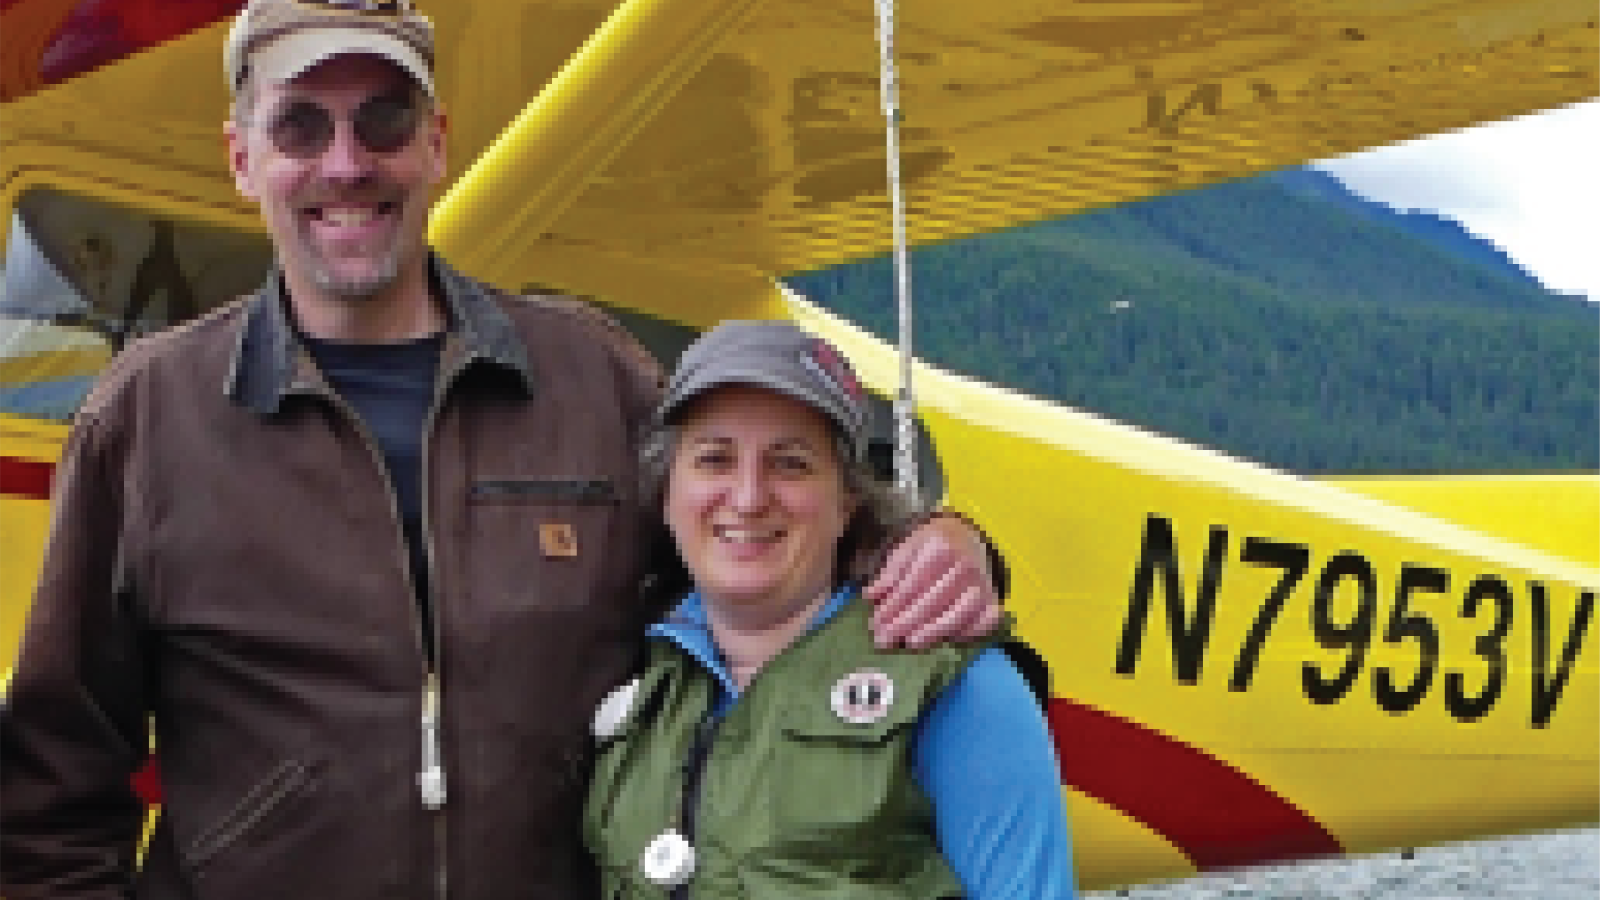 Photo of Jeff DeFreest and his wife in front of a yellow propeller plane in Alaska